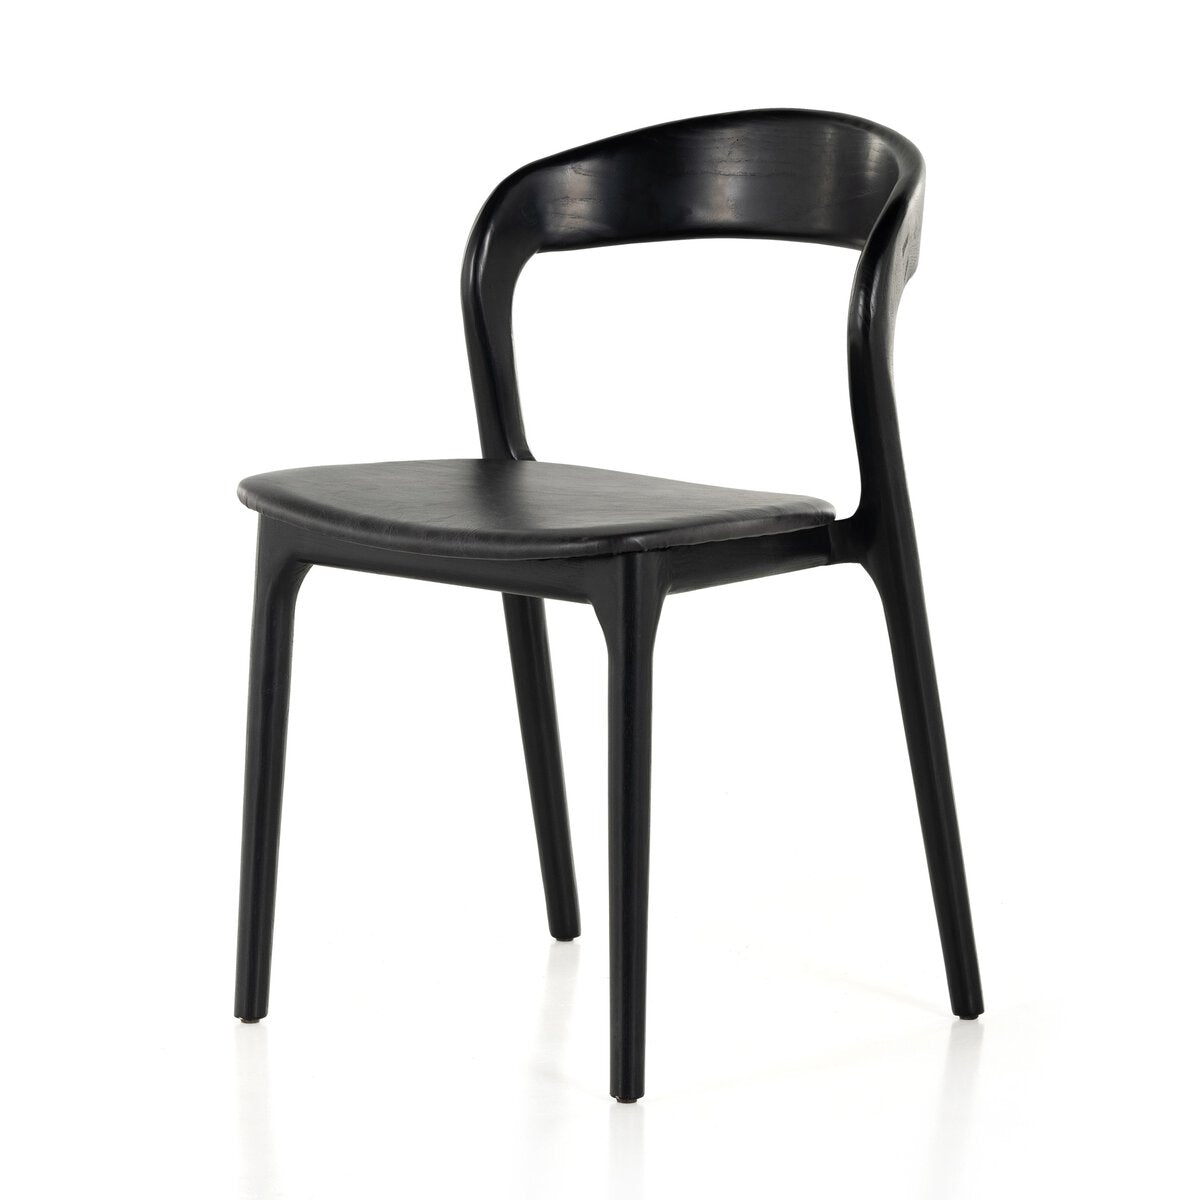 Alexis Dining Chair